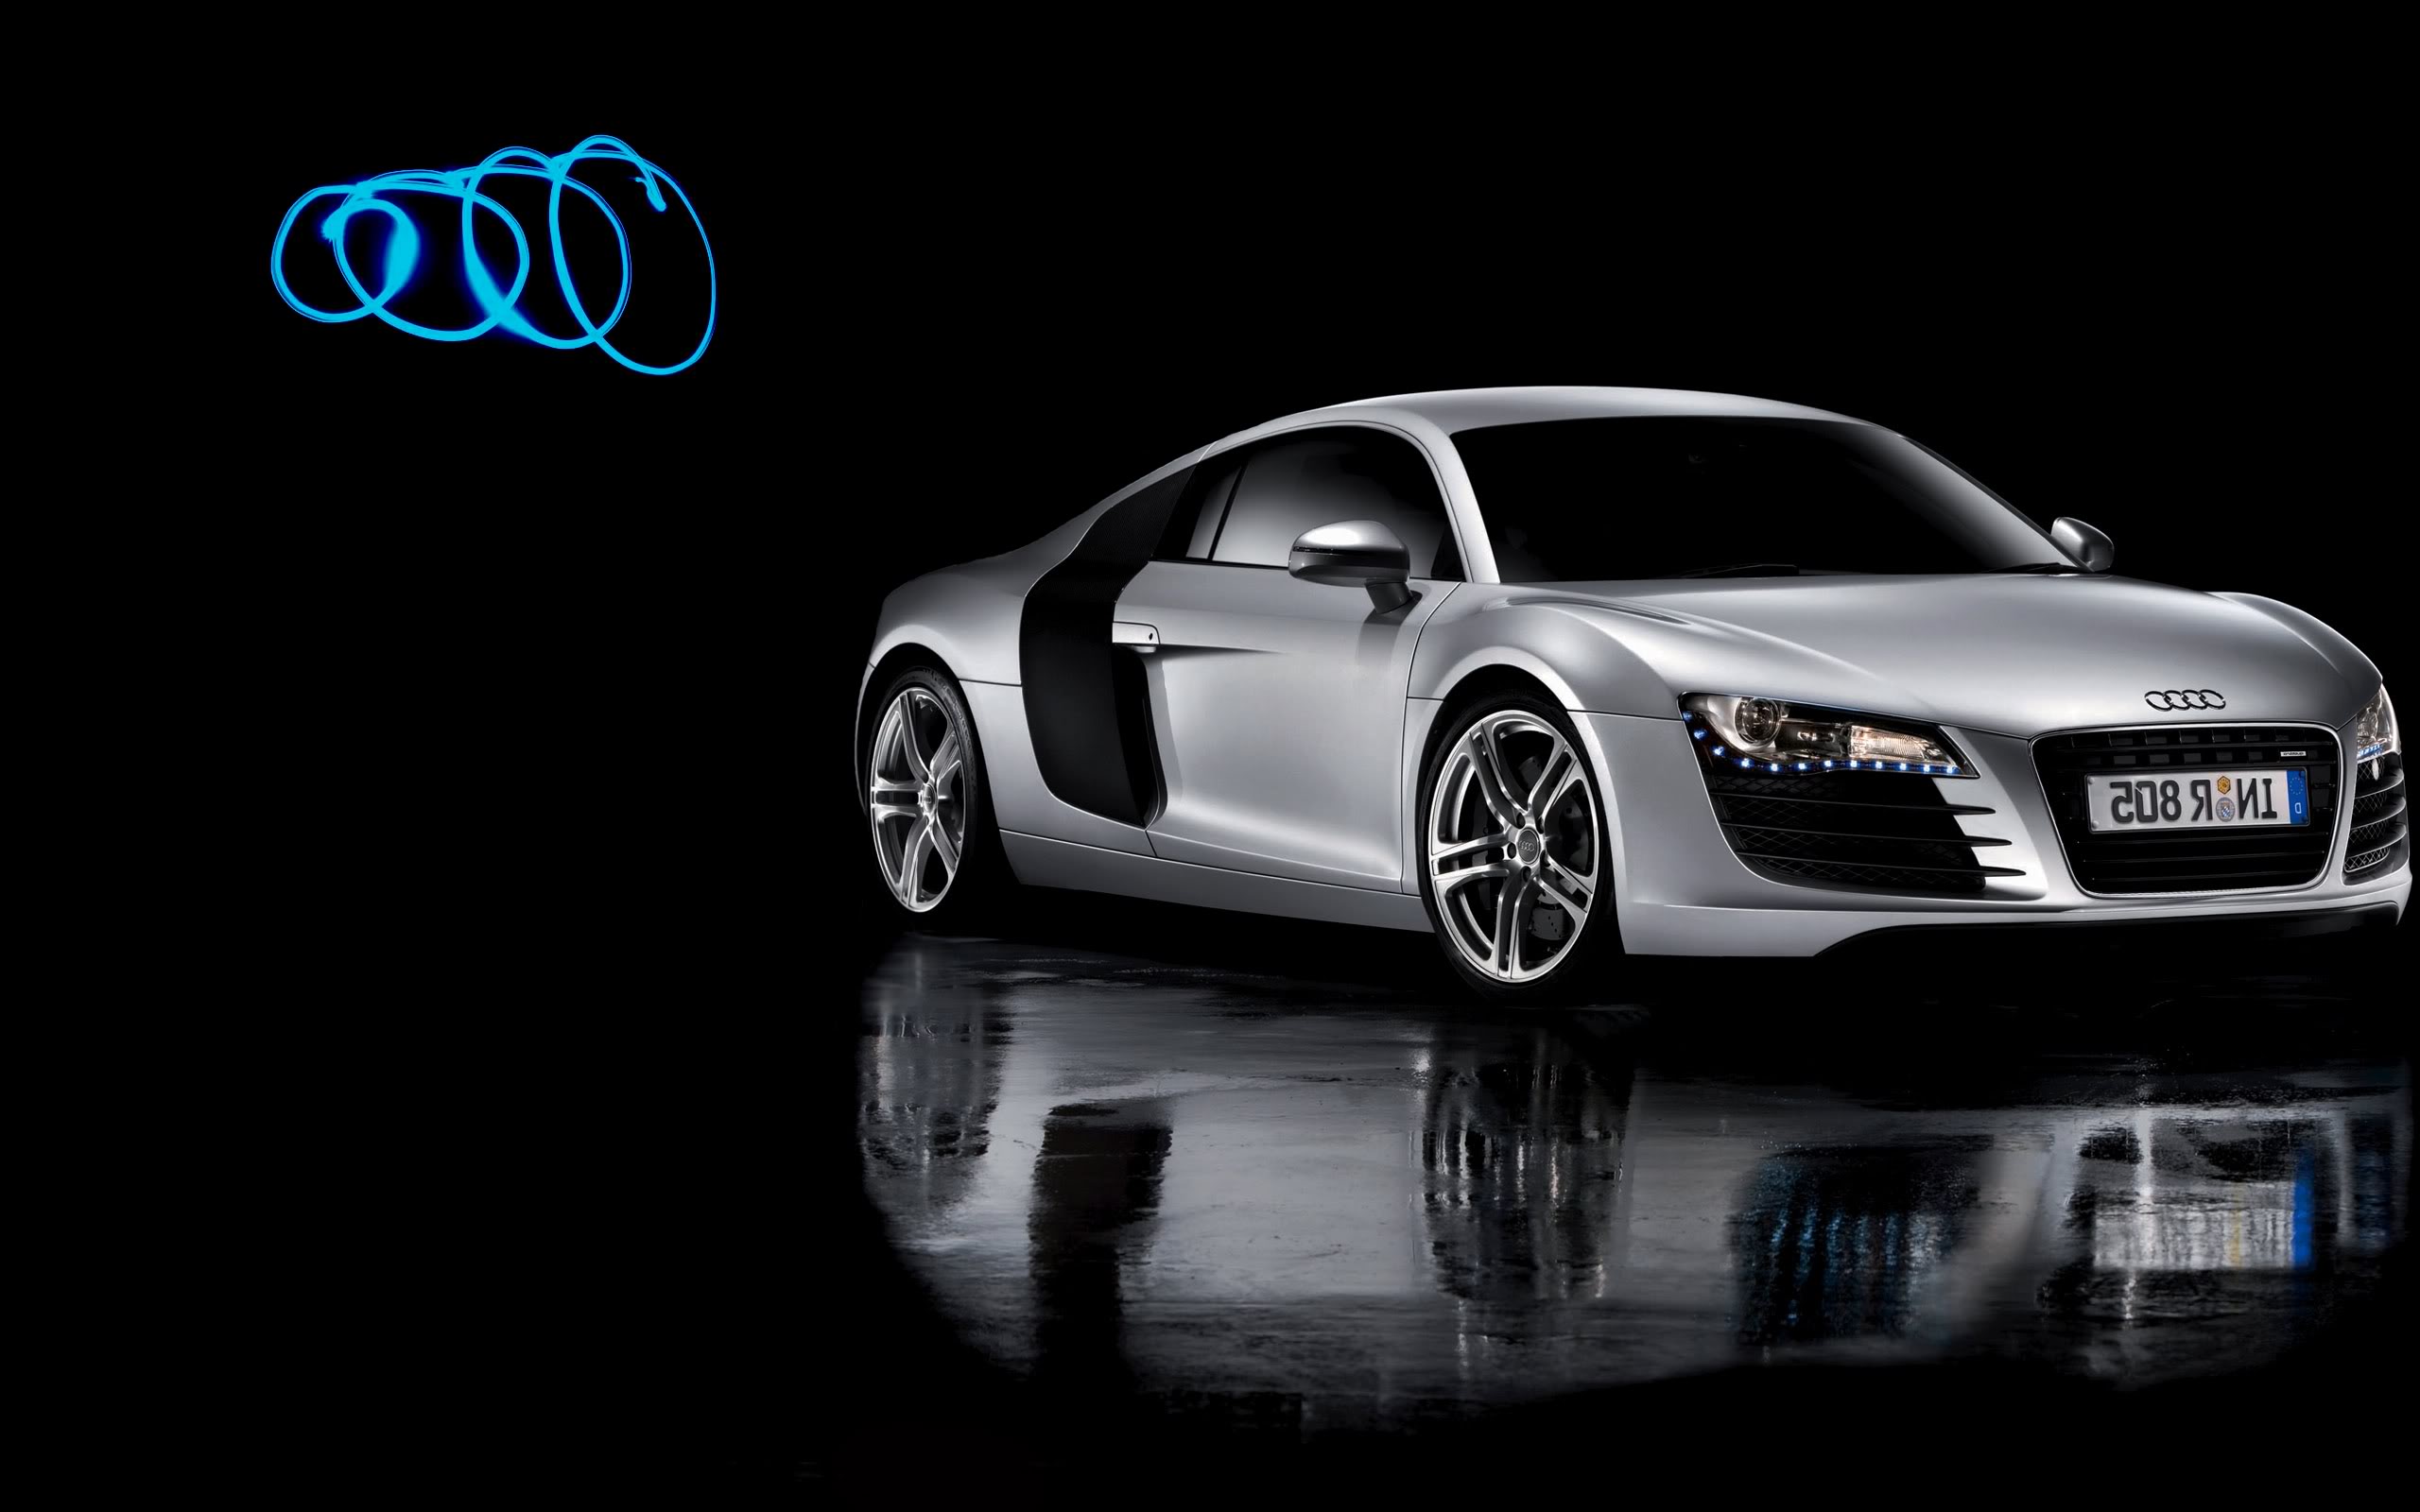 Free Download Cool Hd Audi Wallpapers For Download 2560x1600 For Your Desktop Mobile Tablet Explore 48 Audi Wallpapers For Desktop Audi R8 Wallpaper Audi A6 Wallpaper Audi A3 Wallpaper